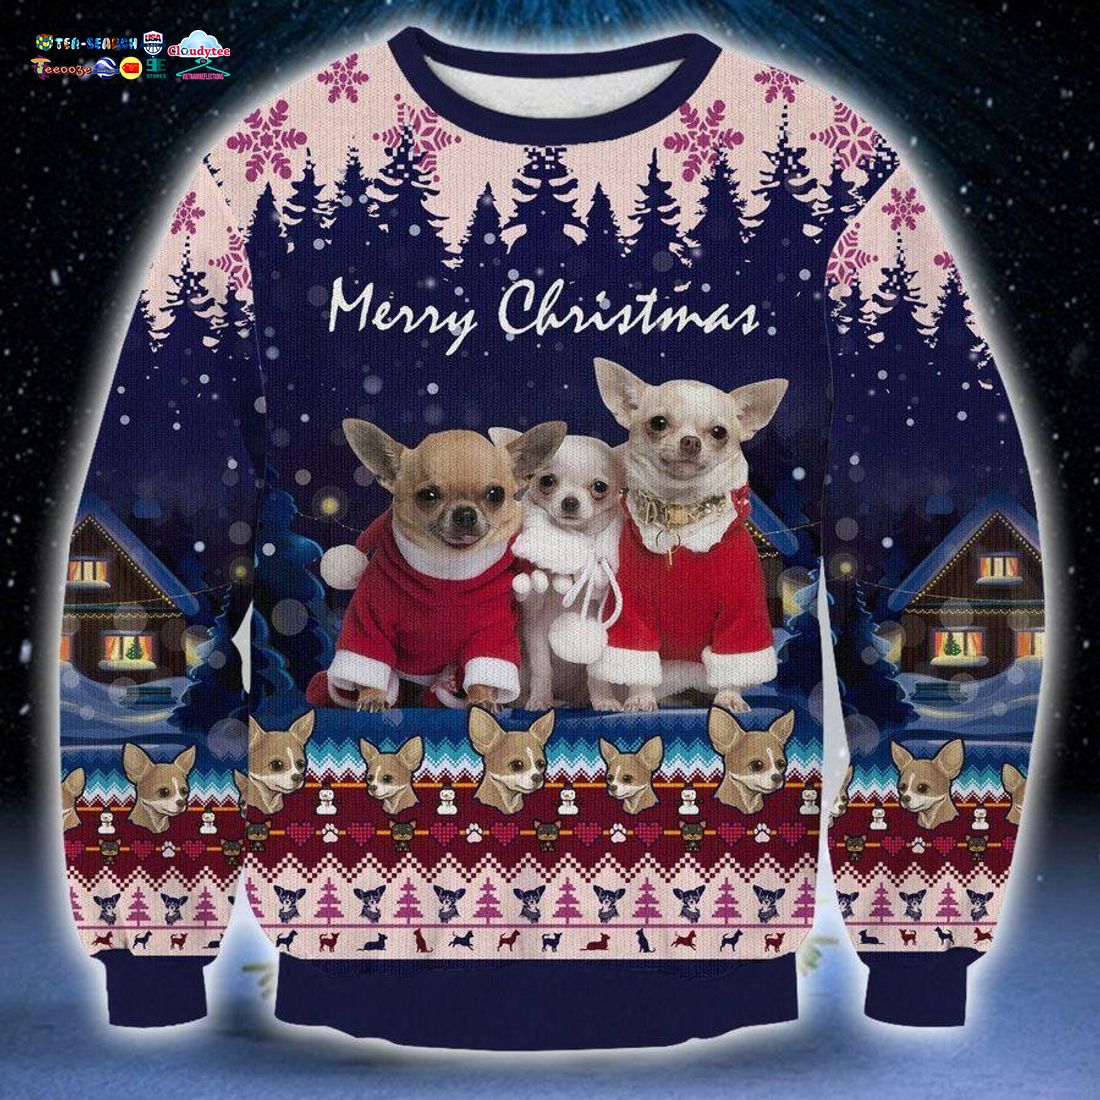 Merry Christmas Chihuahua Ugly Christmas Sweater - Handsome as usual